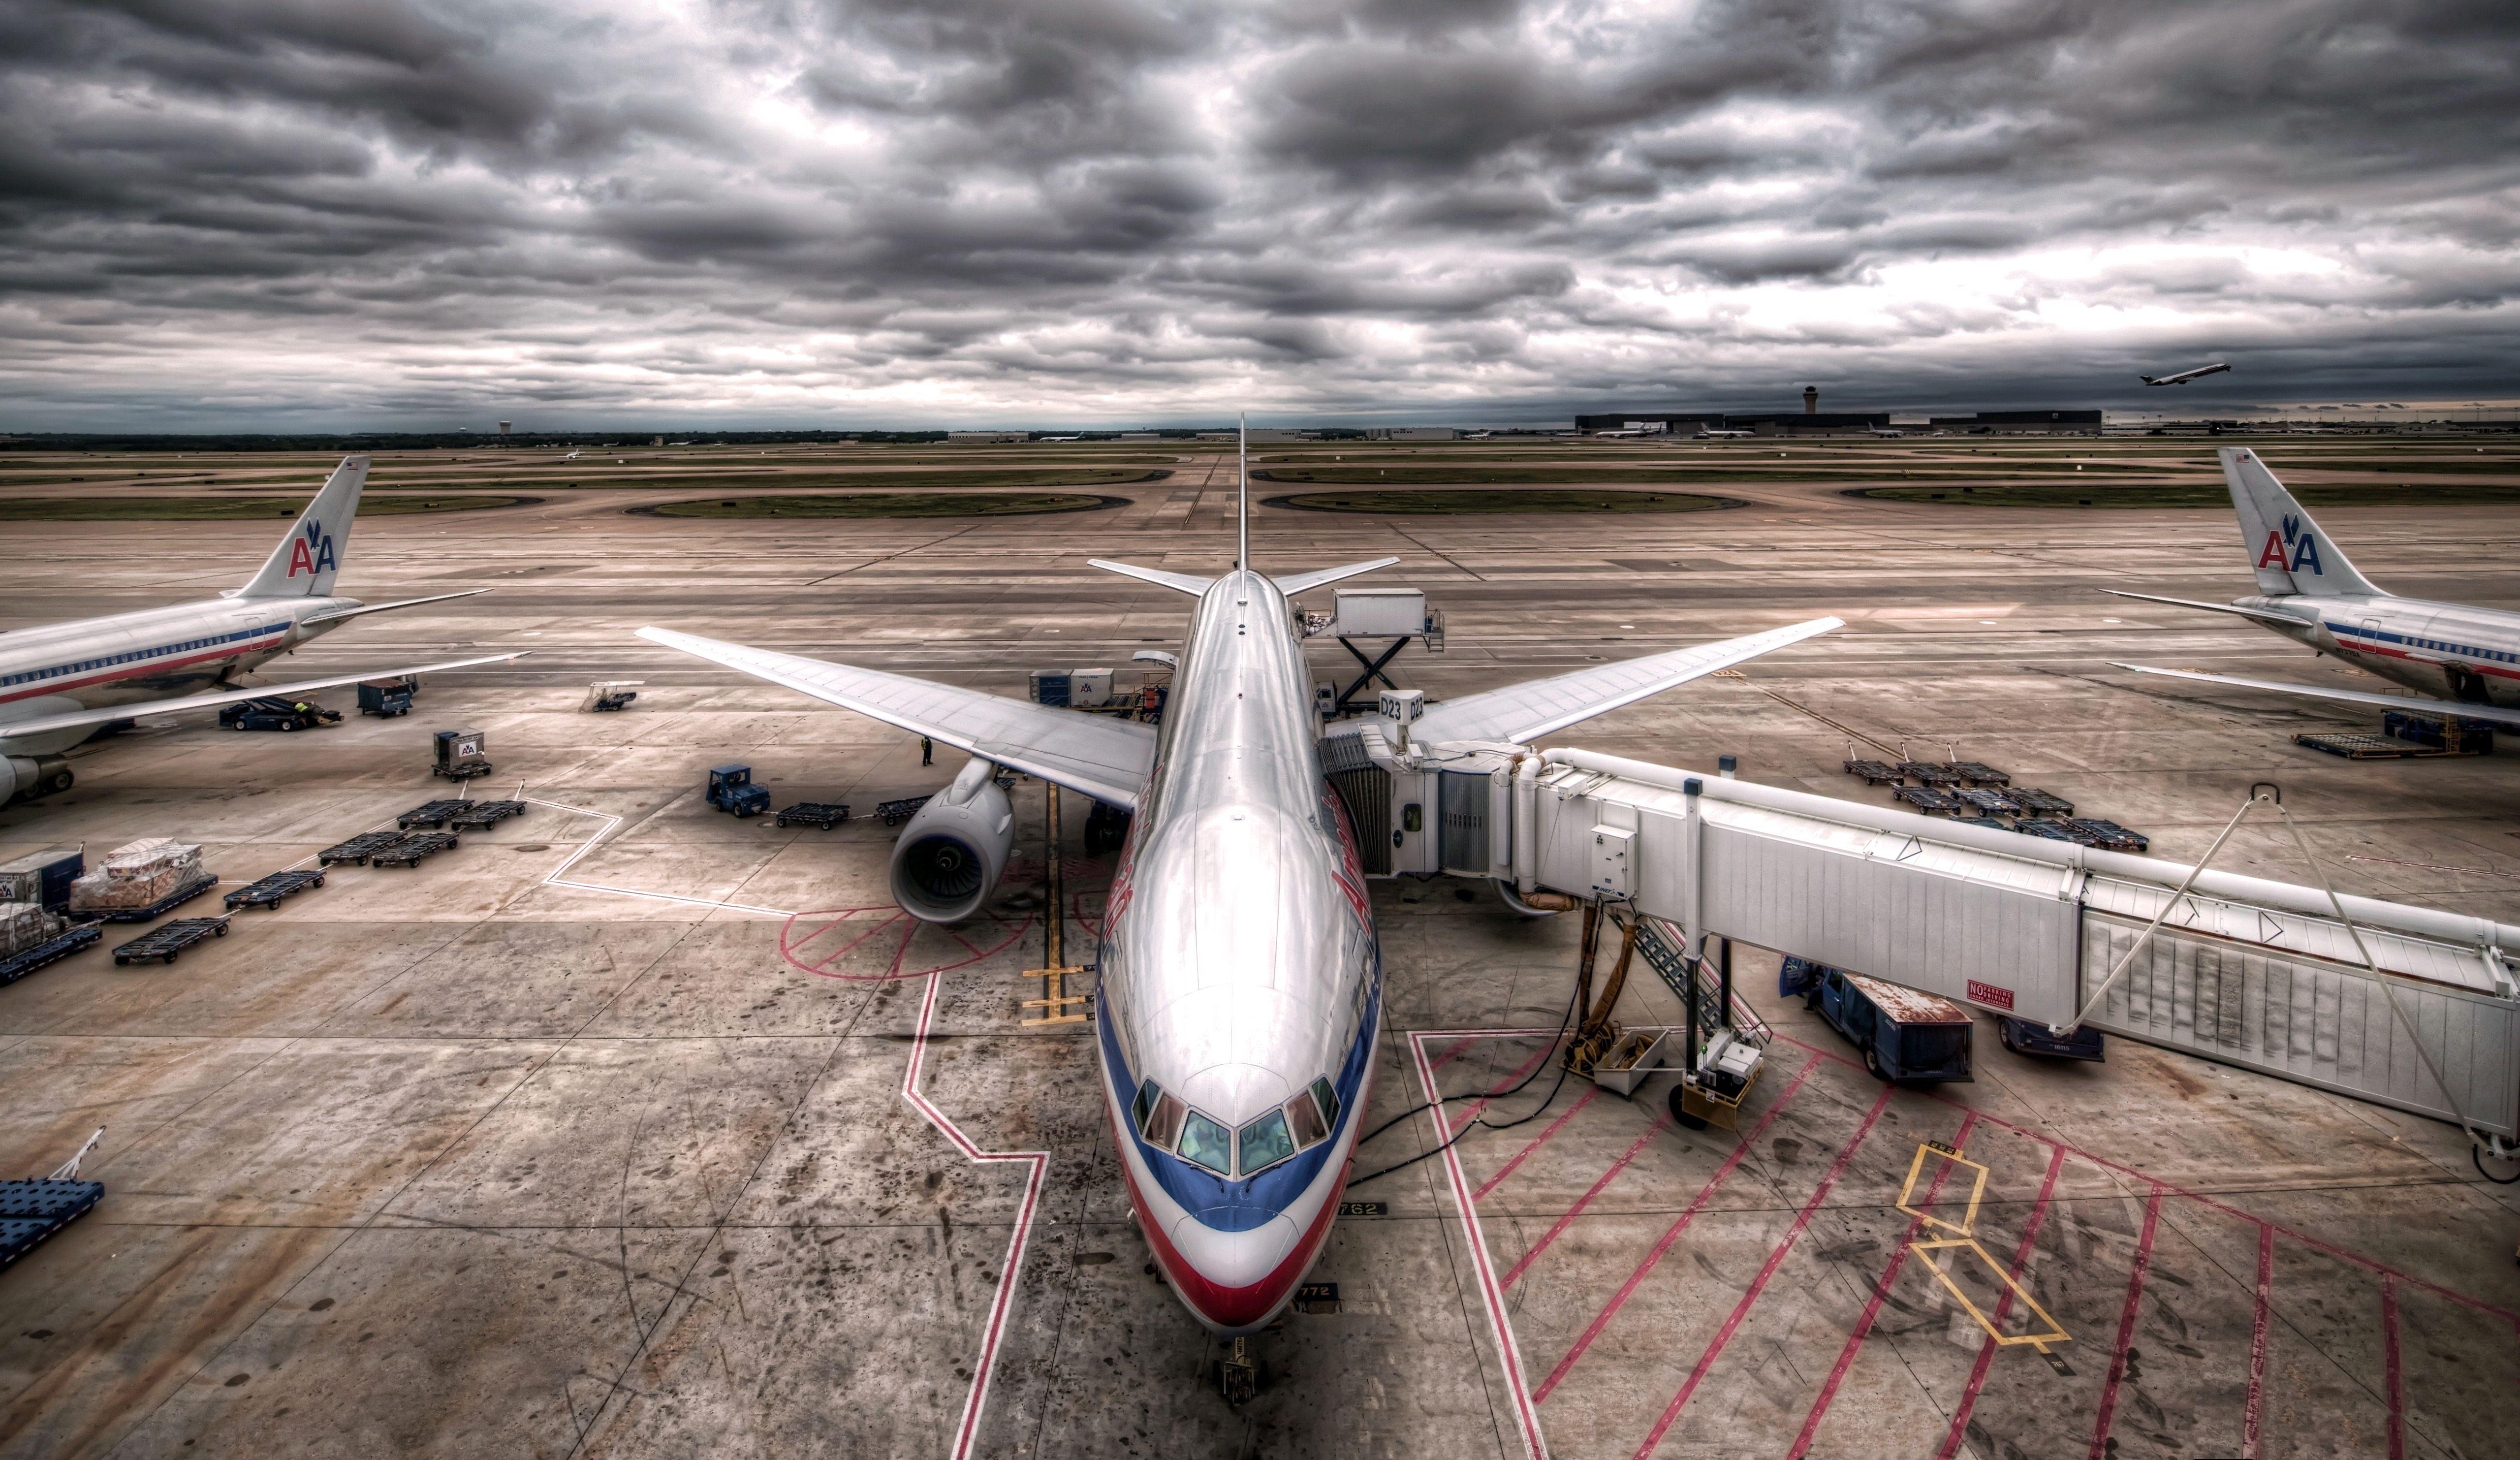 Image Aviation Airplane Passenger Airplanes Boeing 777 HDR Clouds